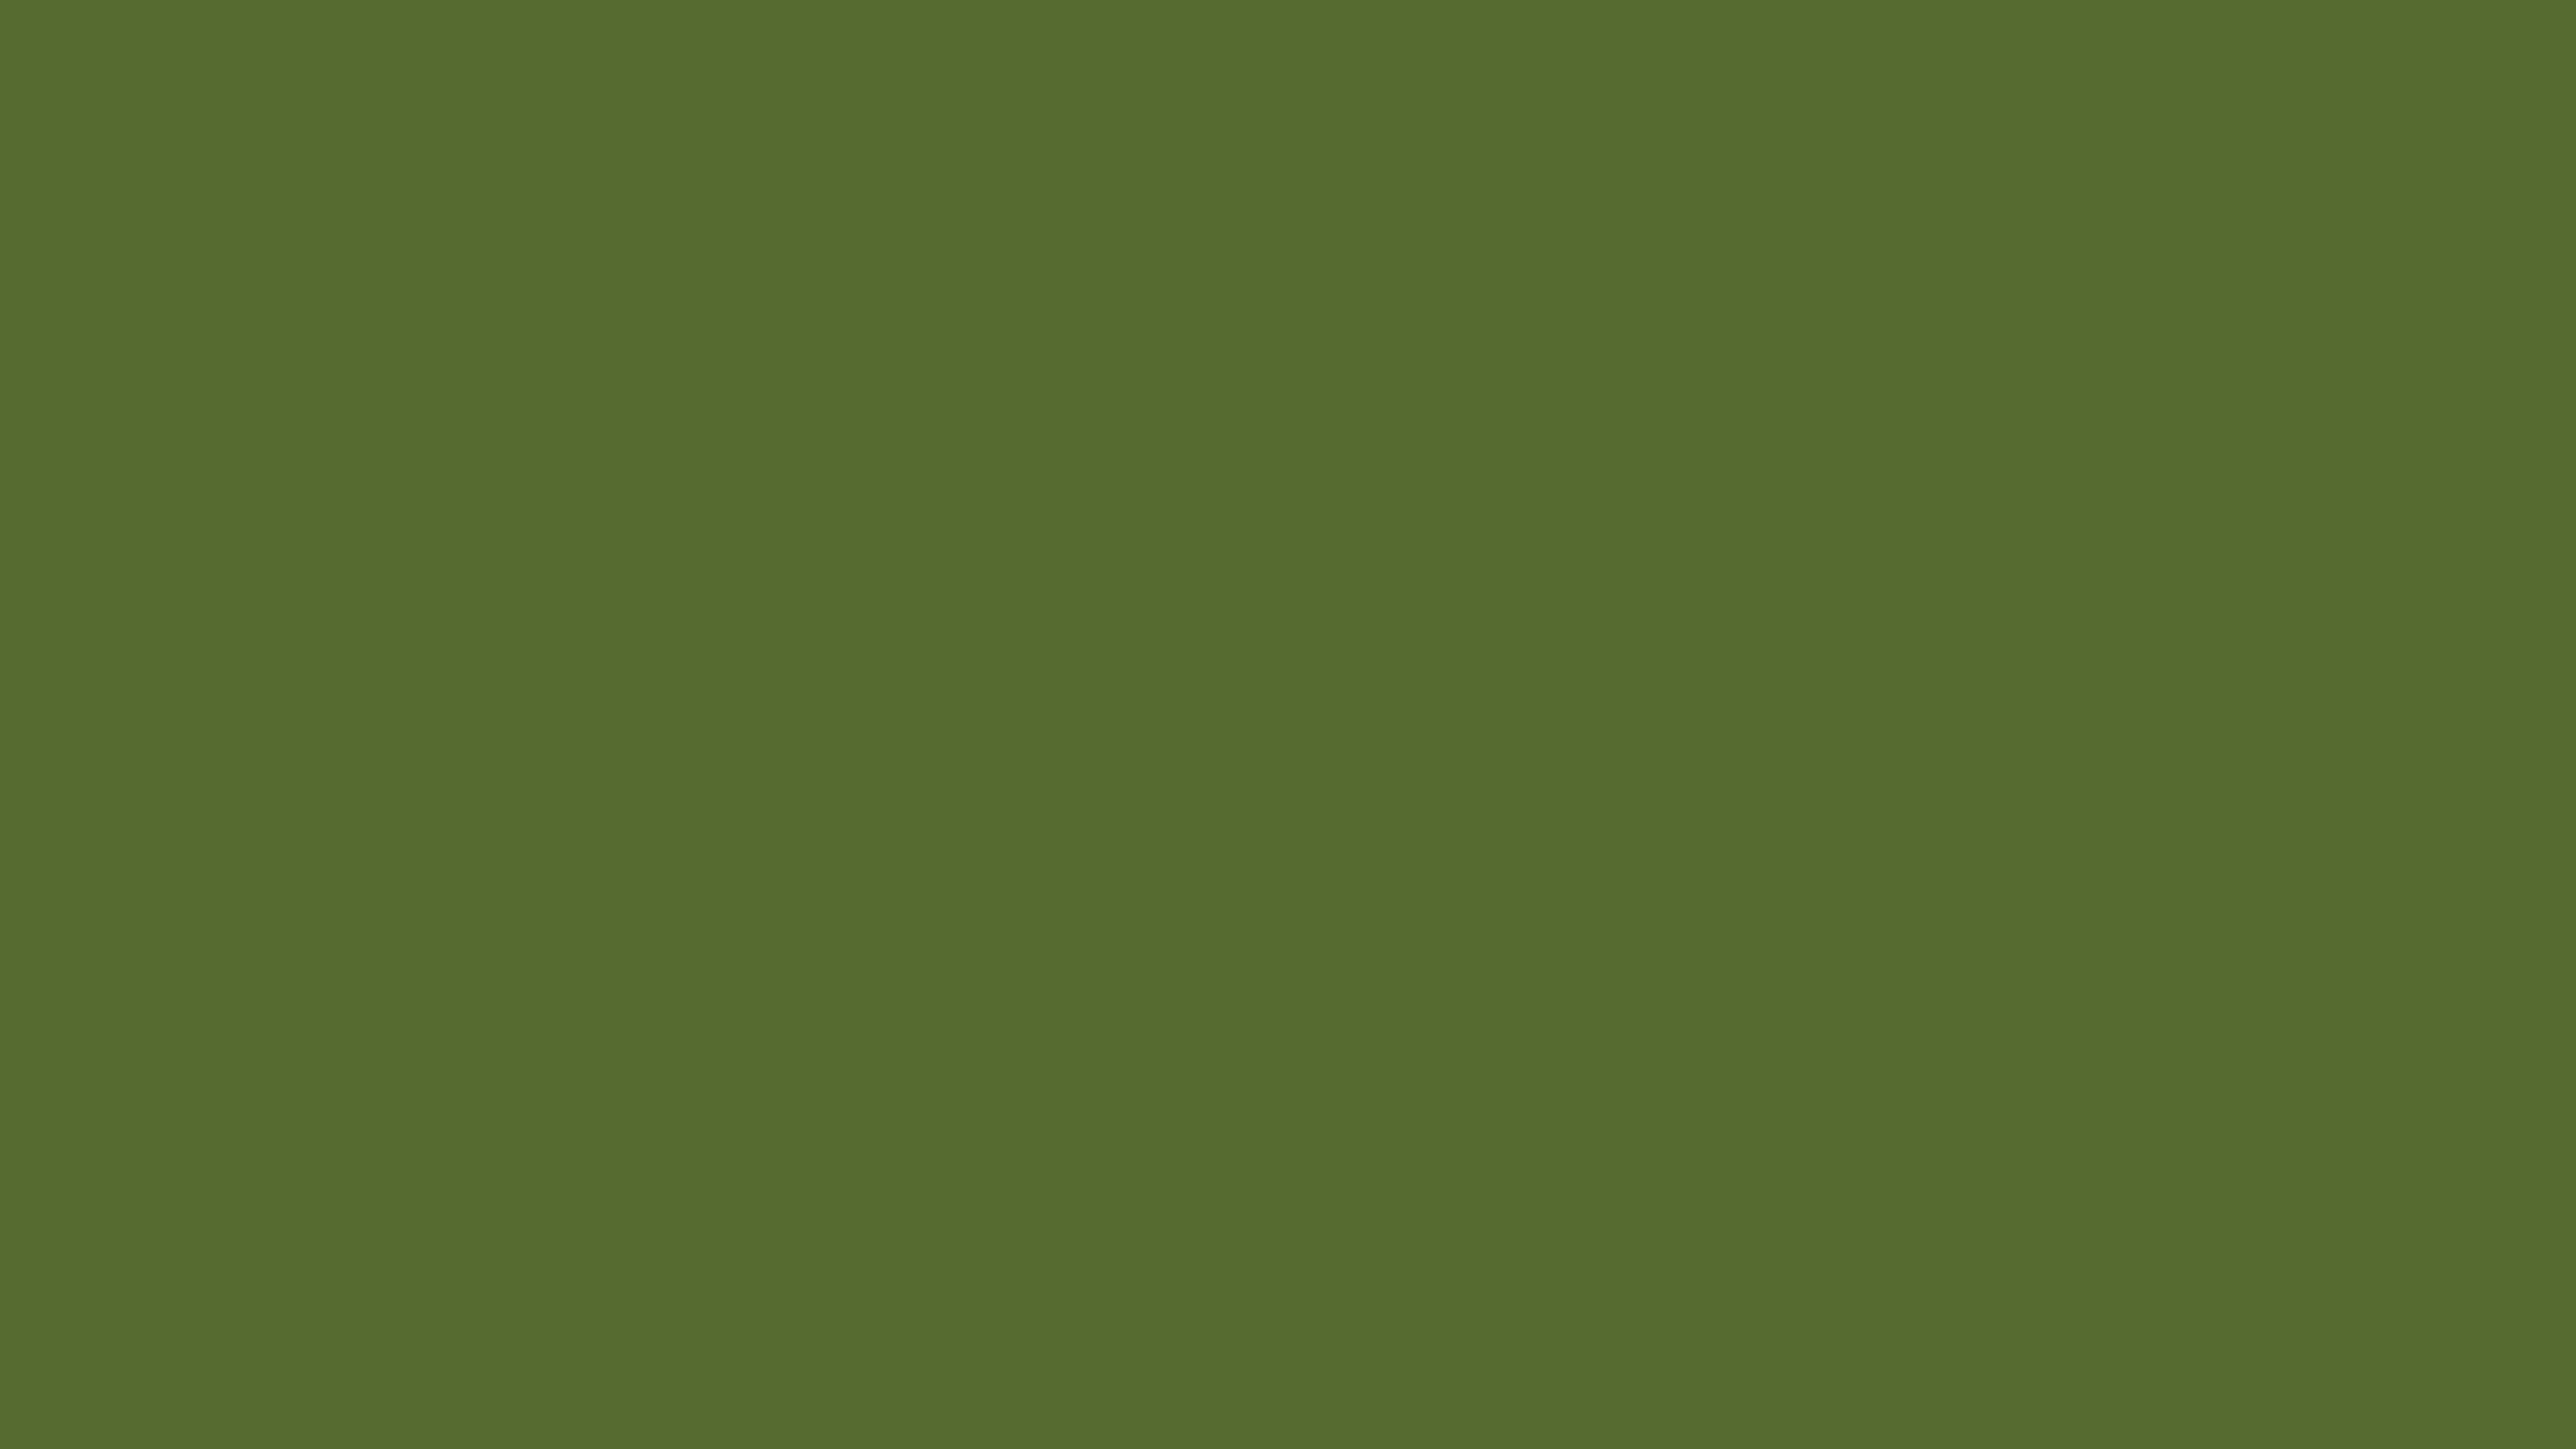 3840x2160 Dark Olive Green #556B2F The Official Register of Color Names